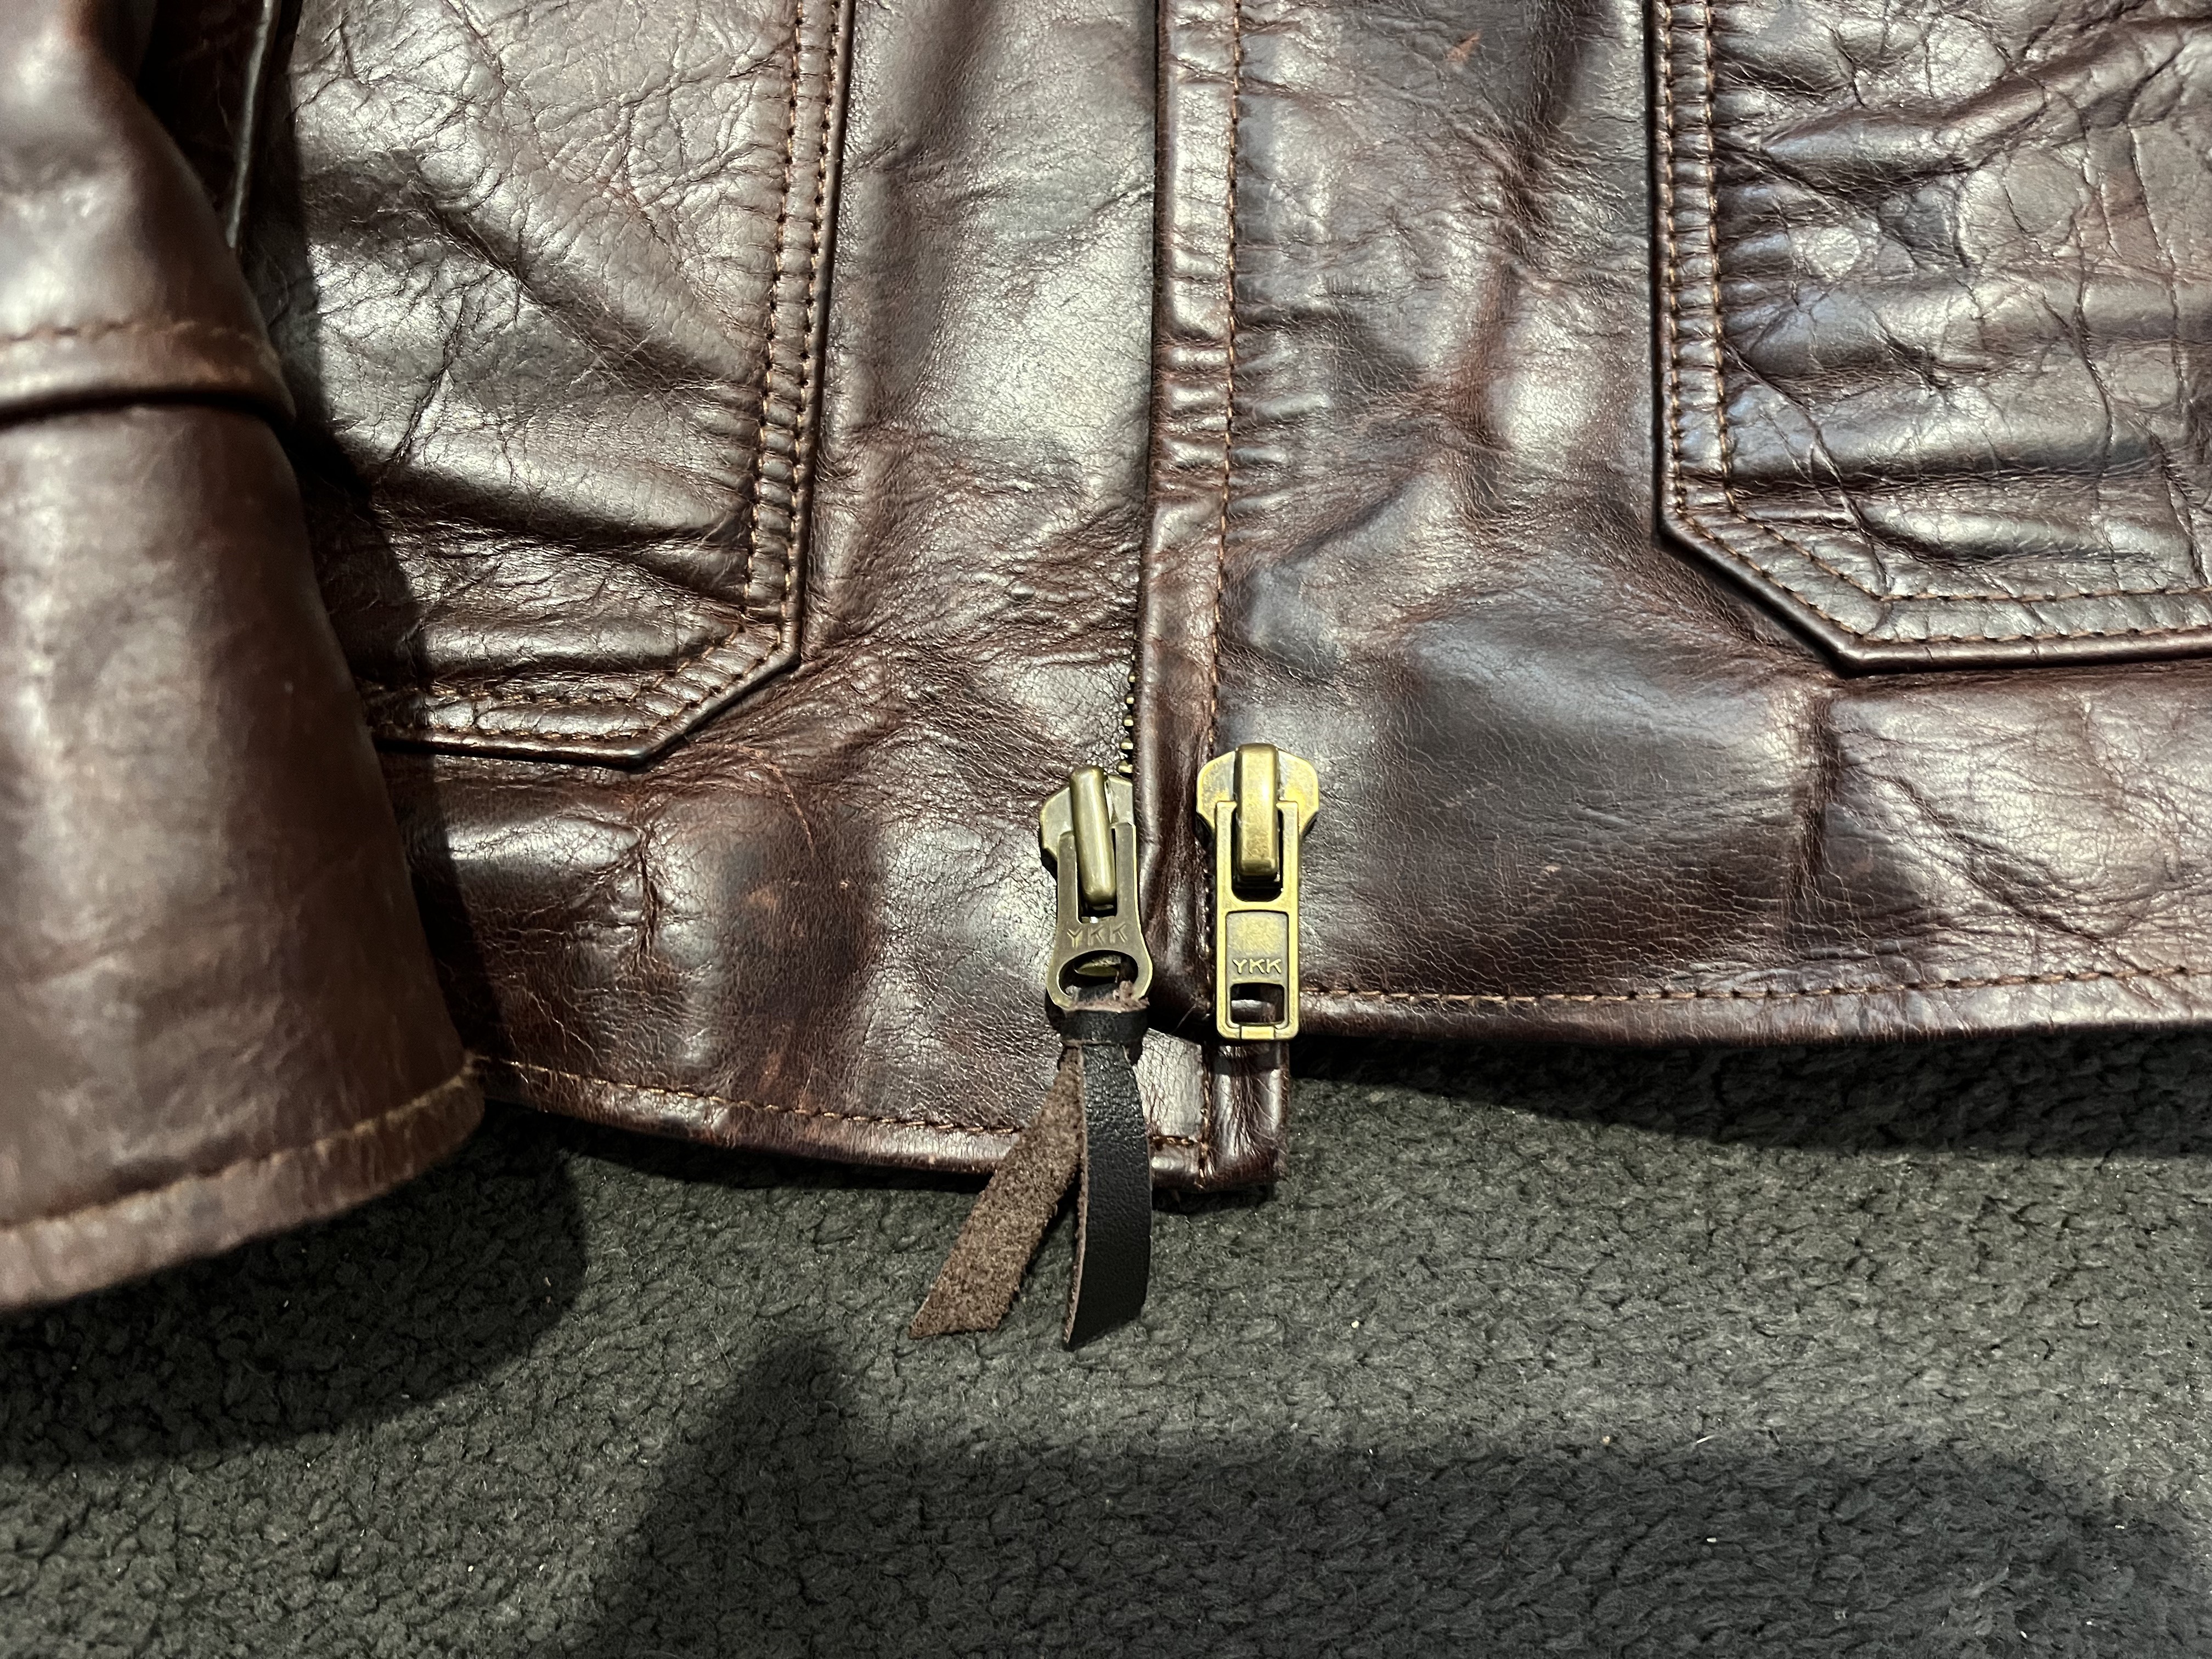 Where to buy repro zips, and better looking YKK pulls.